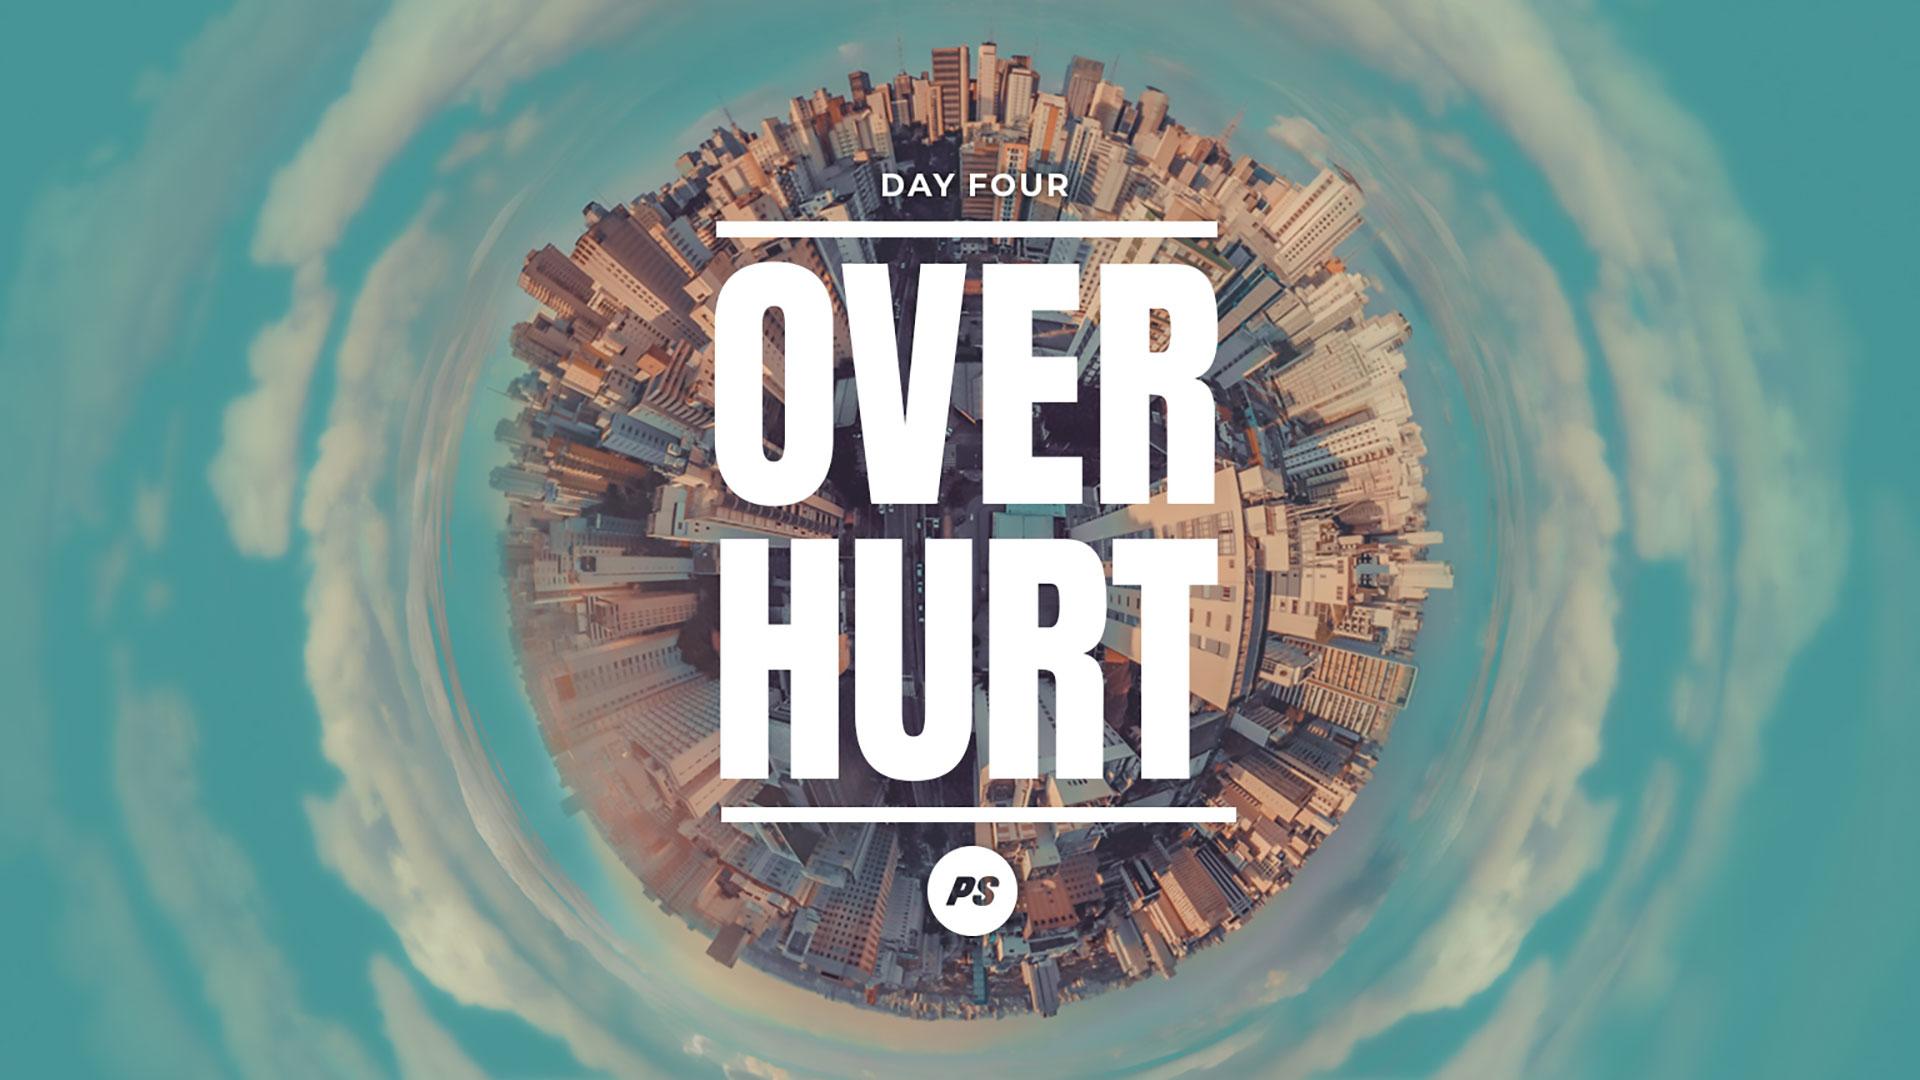 Featured Image for “DAY 4 – He is over hurt”